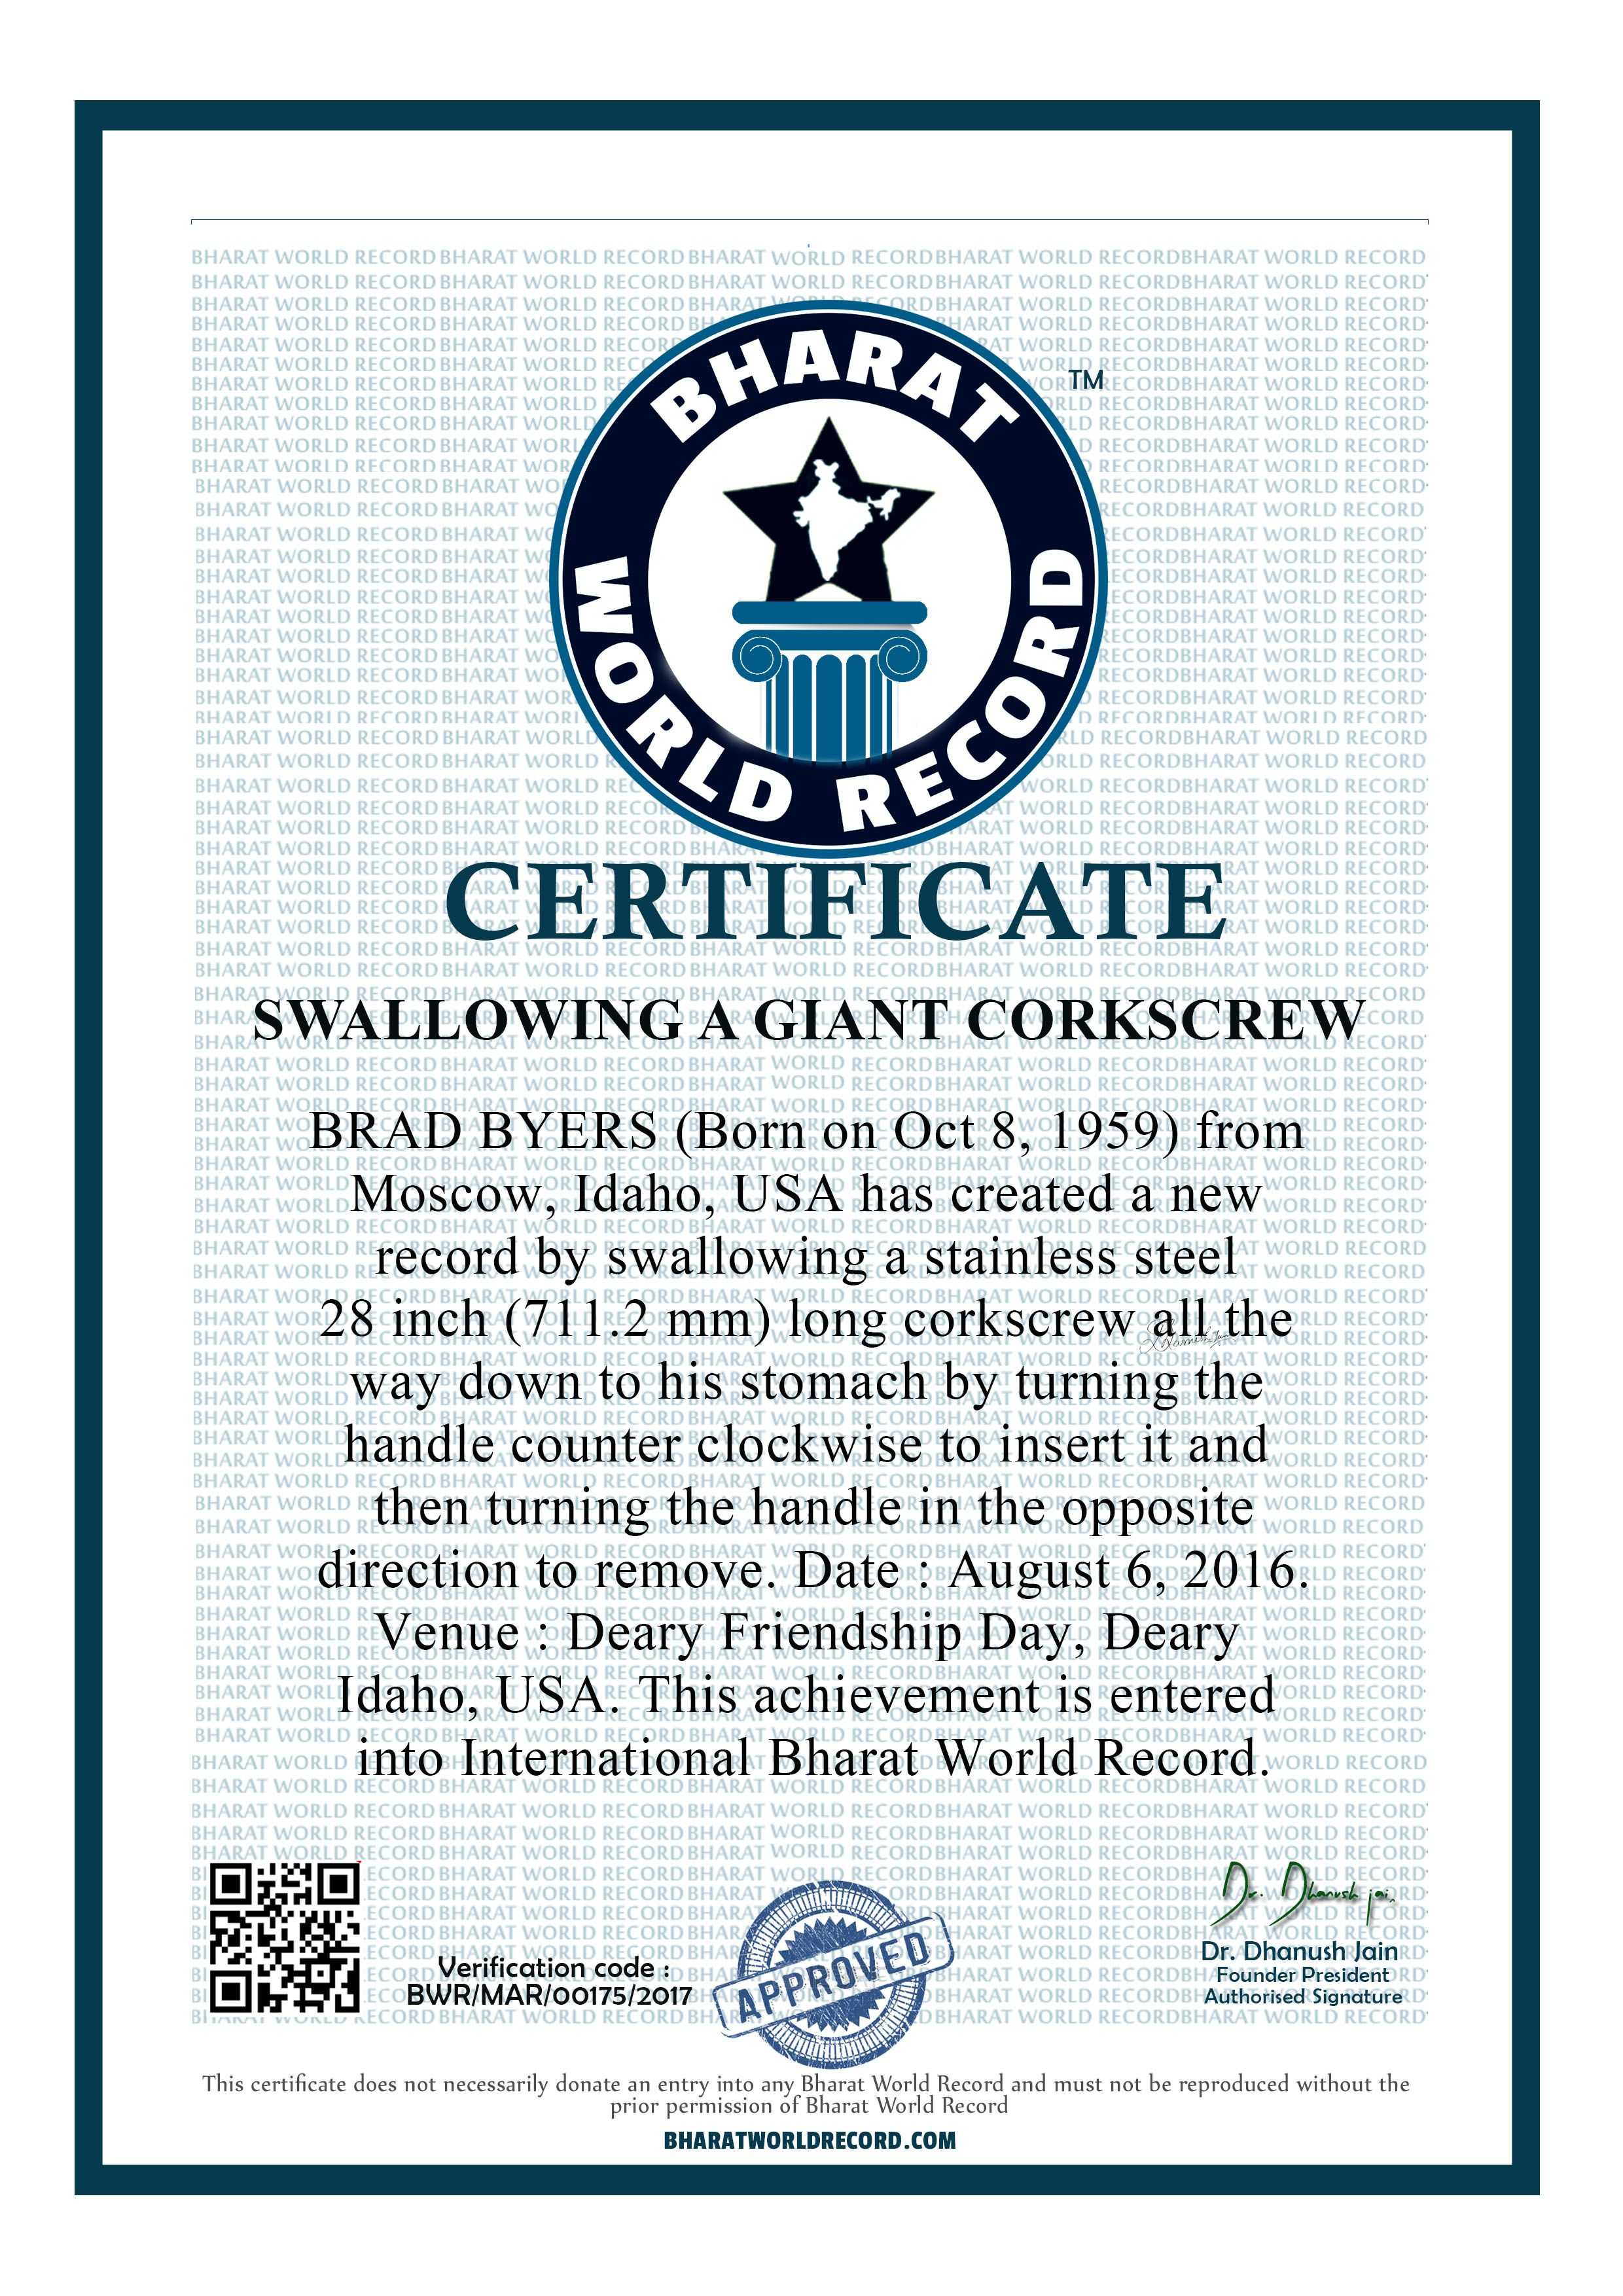 Brad Byers World Record Certificates, Medals, And Other Awards For Guinness World Record Certificate Template